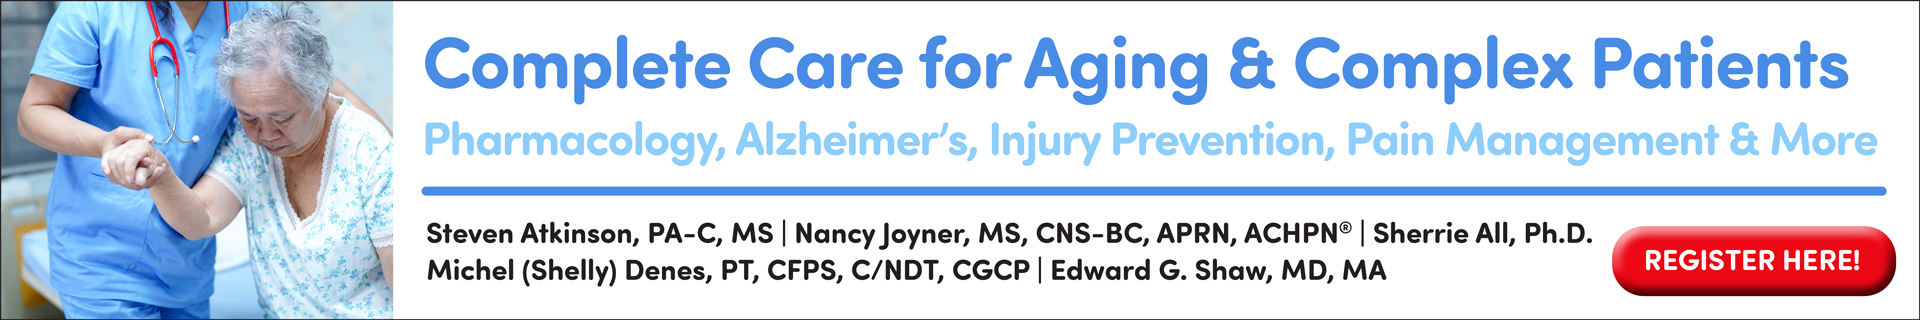 Complete Care for Aging & Complex Patients: Pharmacology, Alzheimer's, Injury Prevention, Pain Management & More